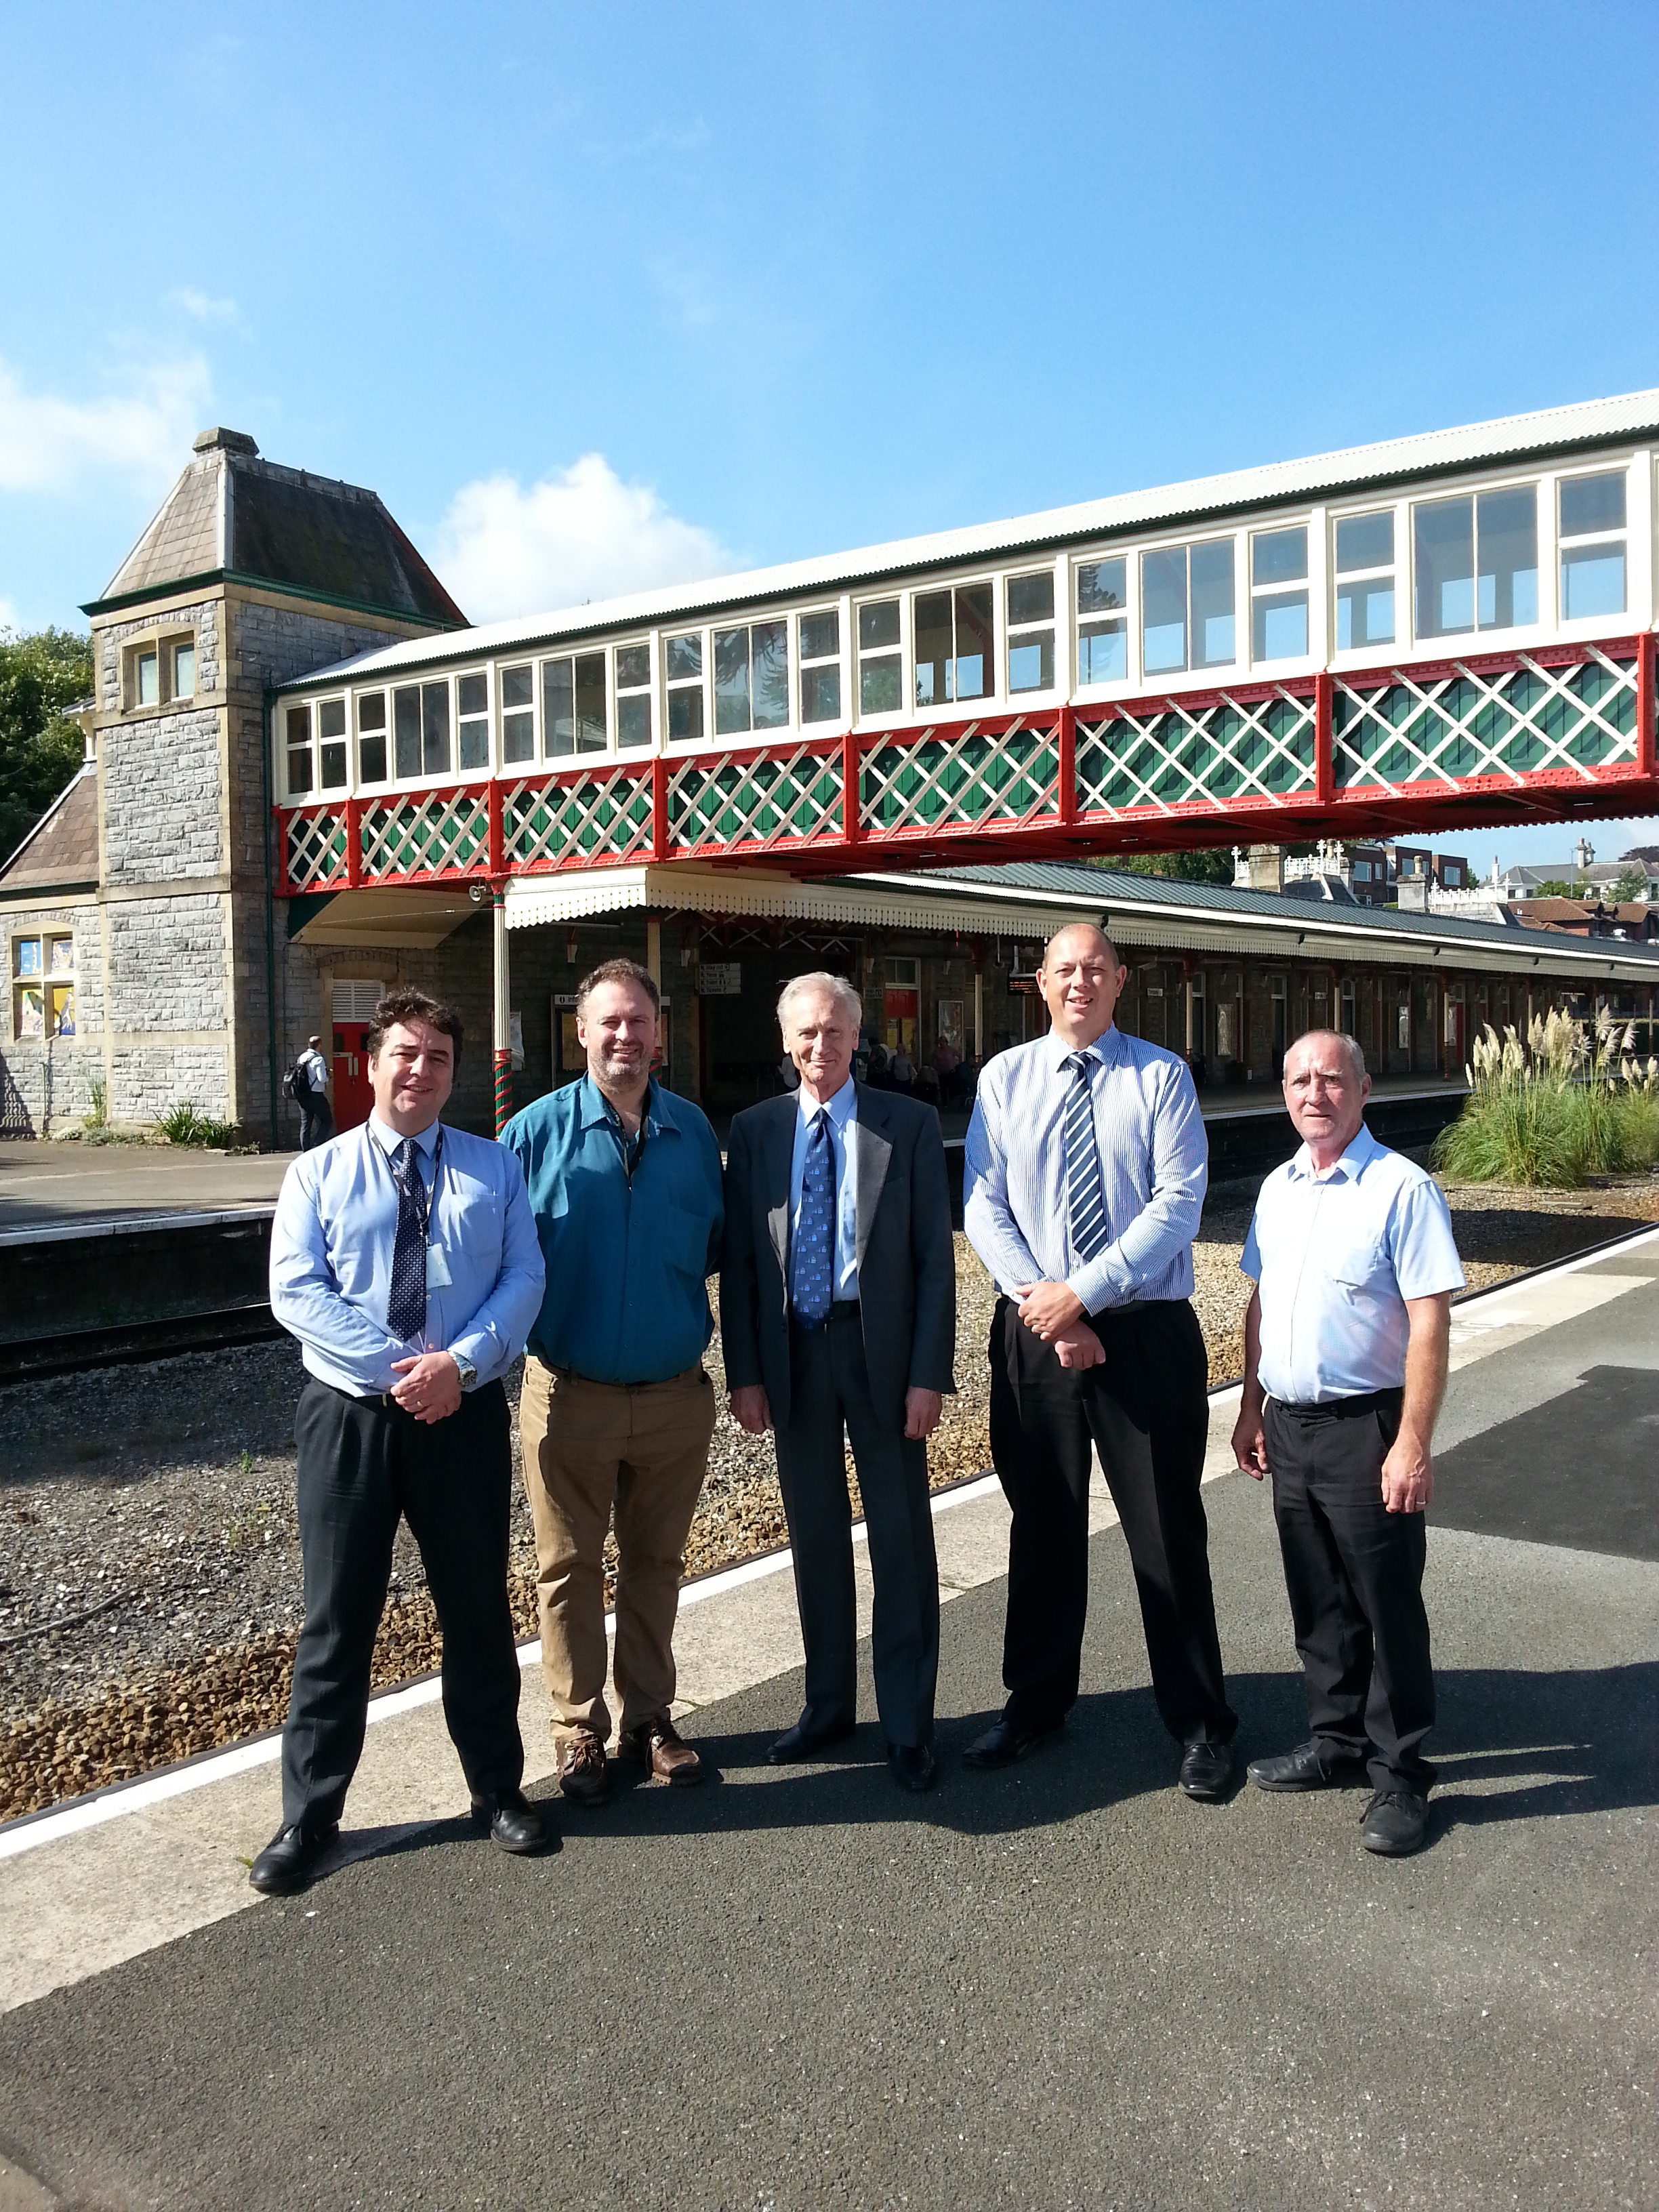 (Left to right) Simon Gyde, Asset Manager for the Western Route, Network Rail | Tony Garratt, Senior Heritage & Design Officer, Torbay Council | Gordon Oliver, Mayor, Torbay Council | Clive Whitfield, Project Manager, Network Rail | Steve Brimacombe, Sisk Rail